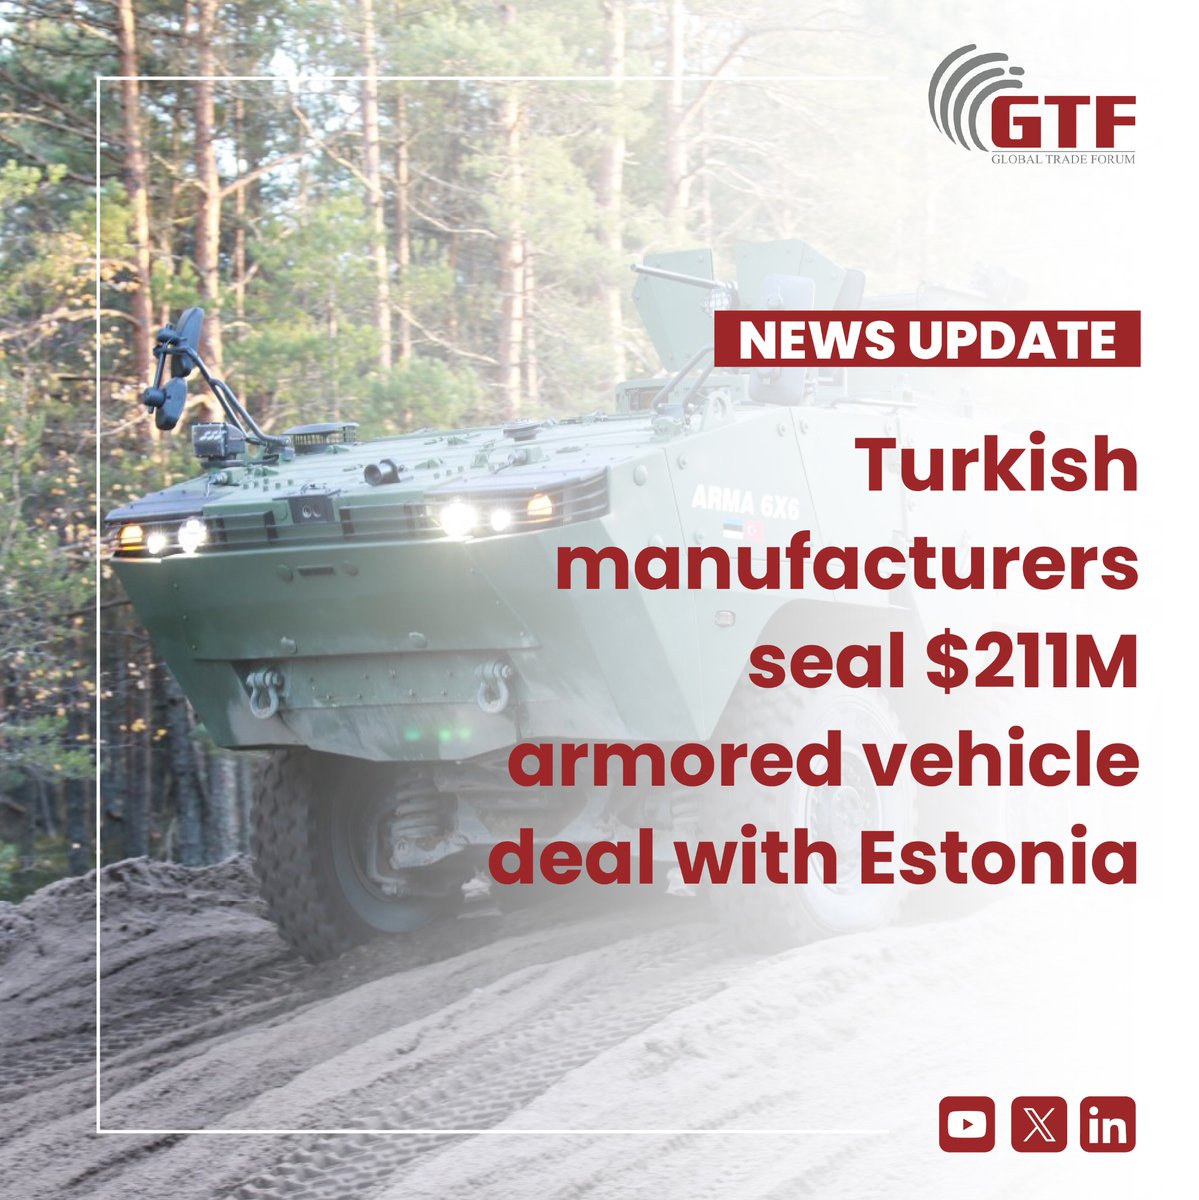 Turkish vehicle manufacturers Otokar and Nurol Makina signed a contract with Estonia for the provision of 230 armored vehicles valued at approximately 200 million euros on Wednesday. 

#Otokar #NurolMakina #Estonia #ArmoredVehicles #ContractSigning #gtf #globaltradeforum